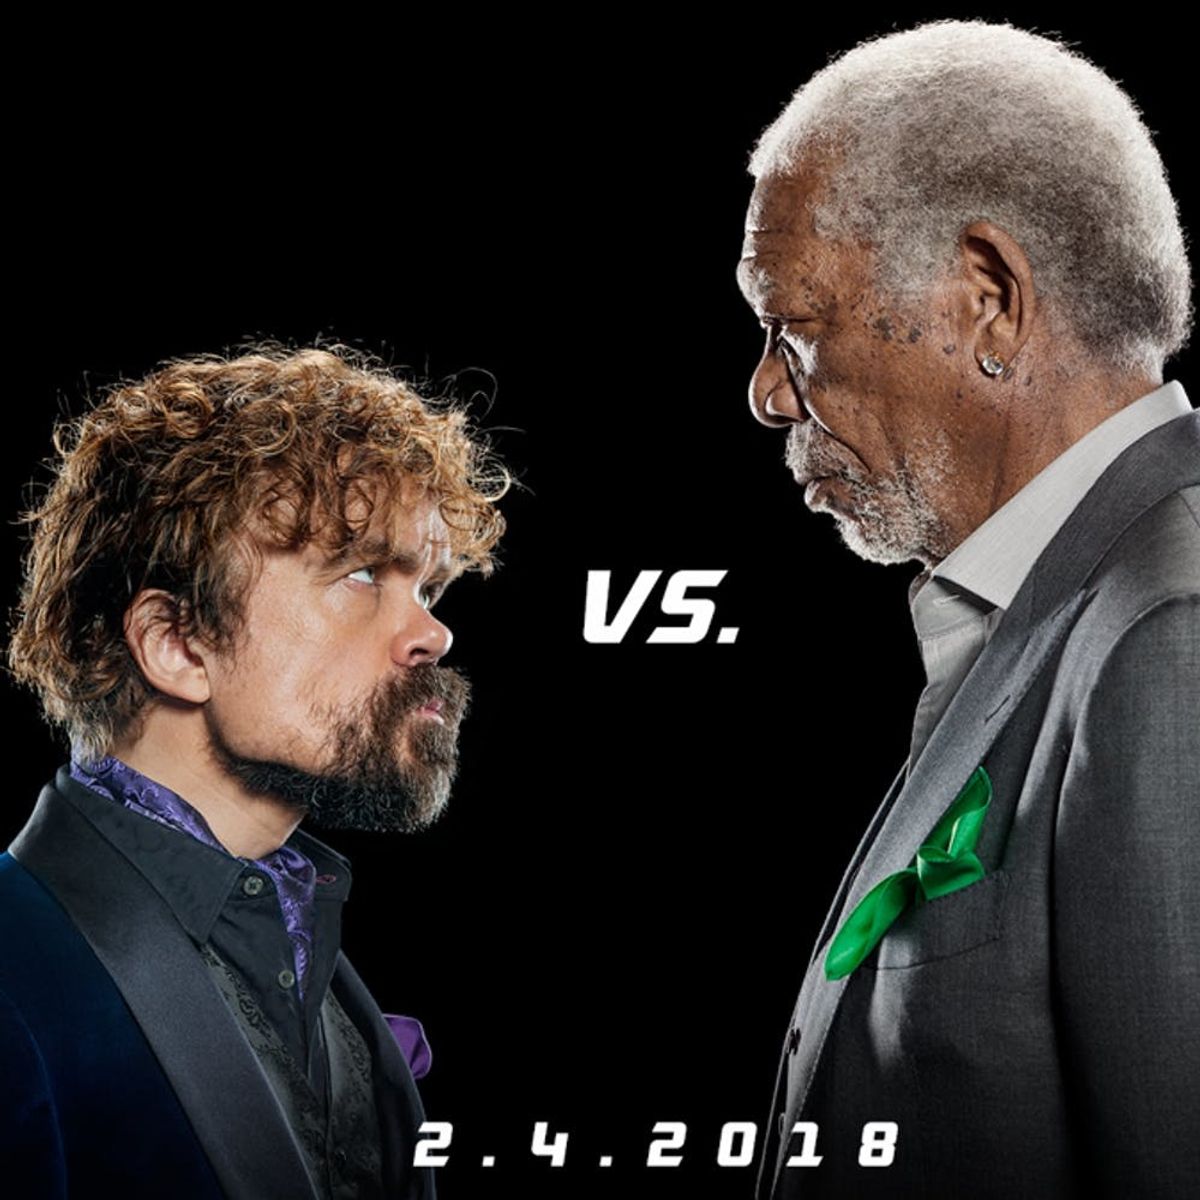 Morgan Freeman and Peter Dinklage Face Off in an Epic Lip-Sync Super Bowl Rap Battle